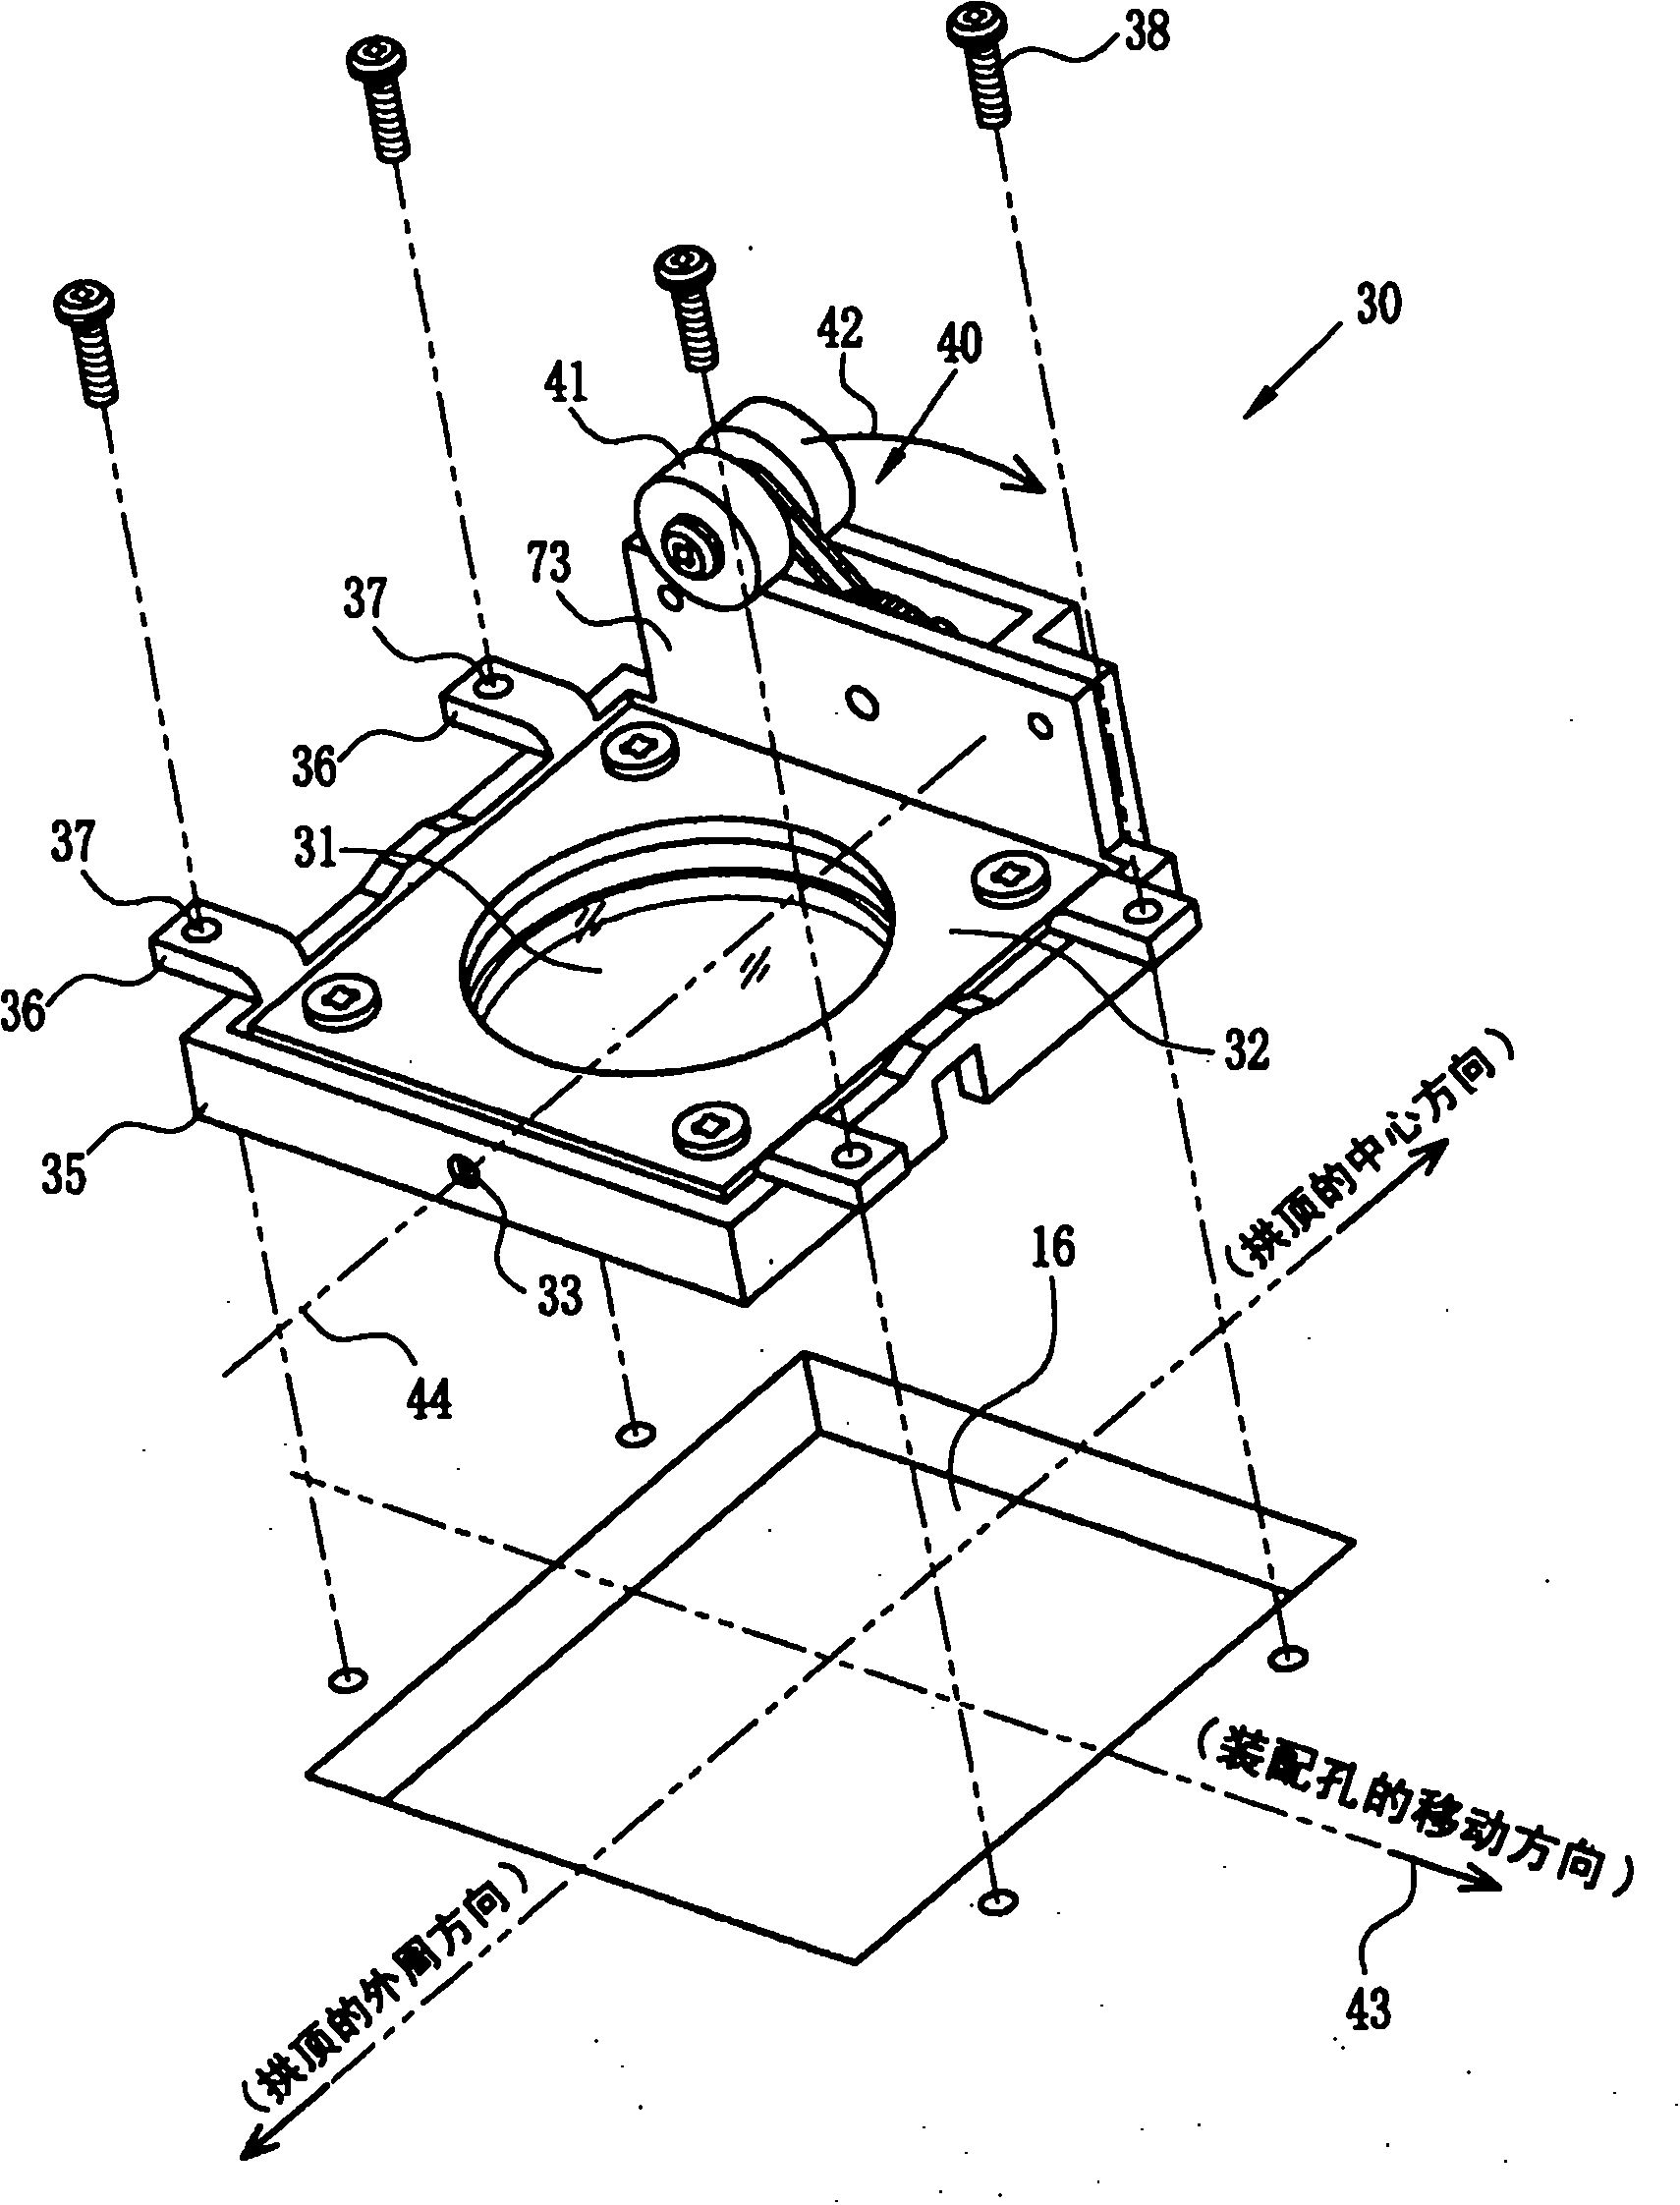 Workpiece turnover unit, vacuum film-forming device and workpiece assembly unit